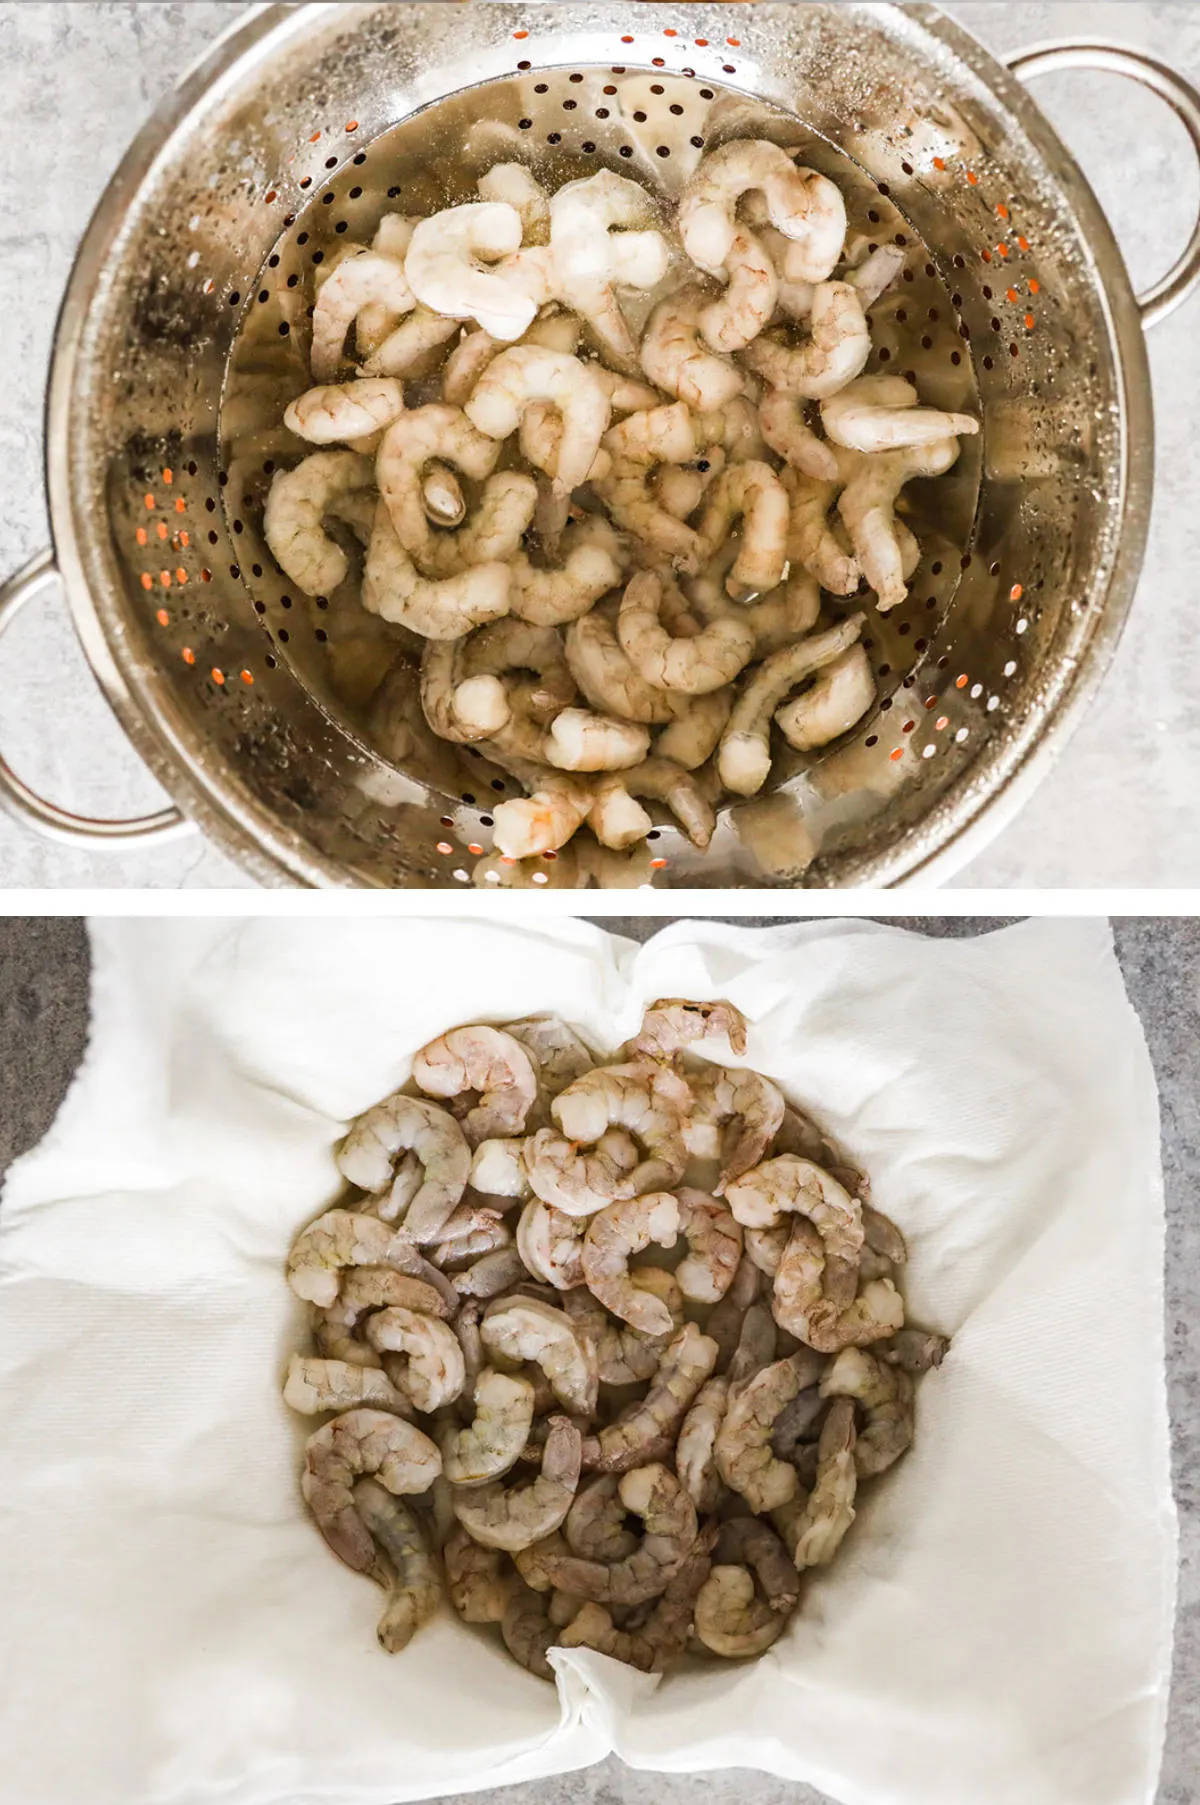 Two overhead images in one: 1. Thawed shrimp in strainer. 2. Shrimp drying in paper towel in a bowl. 